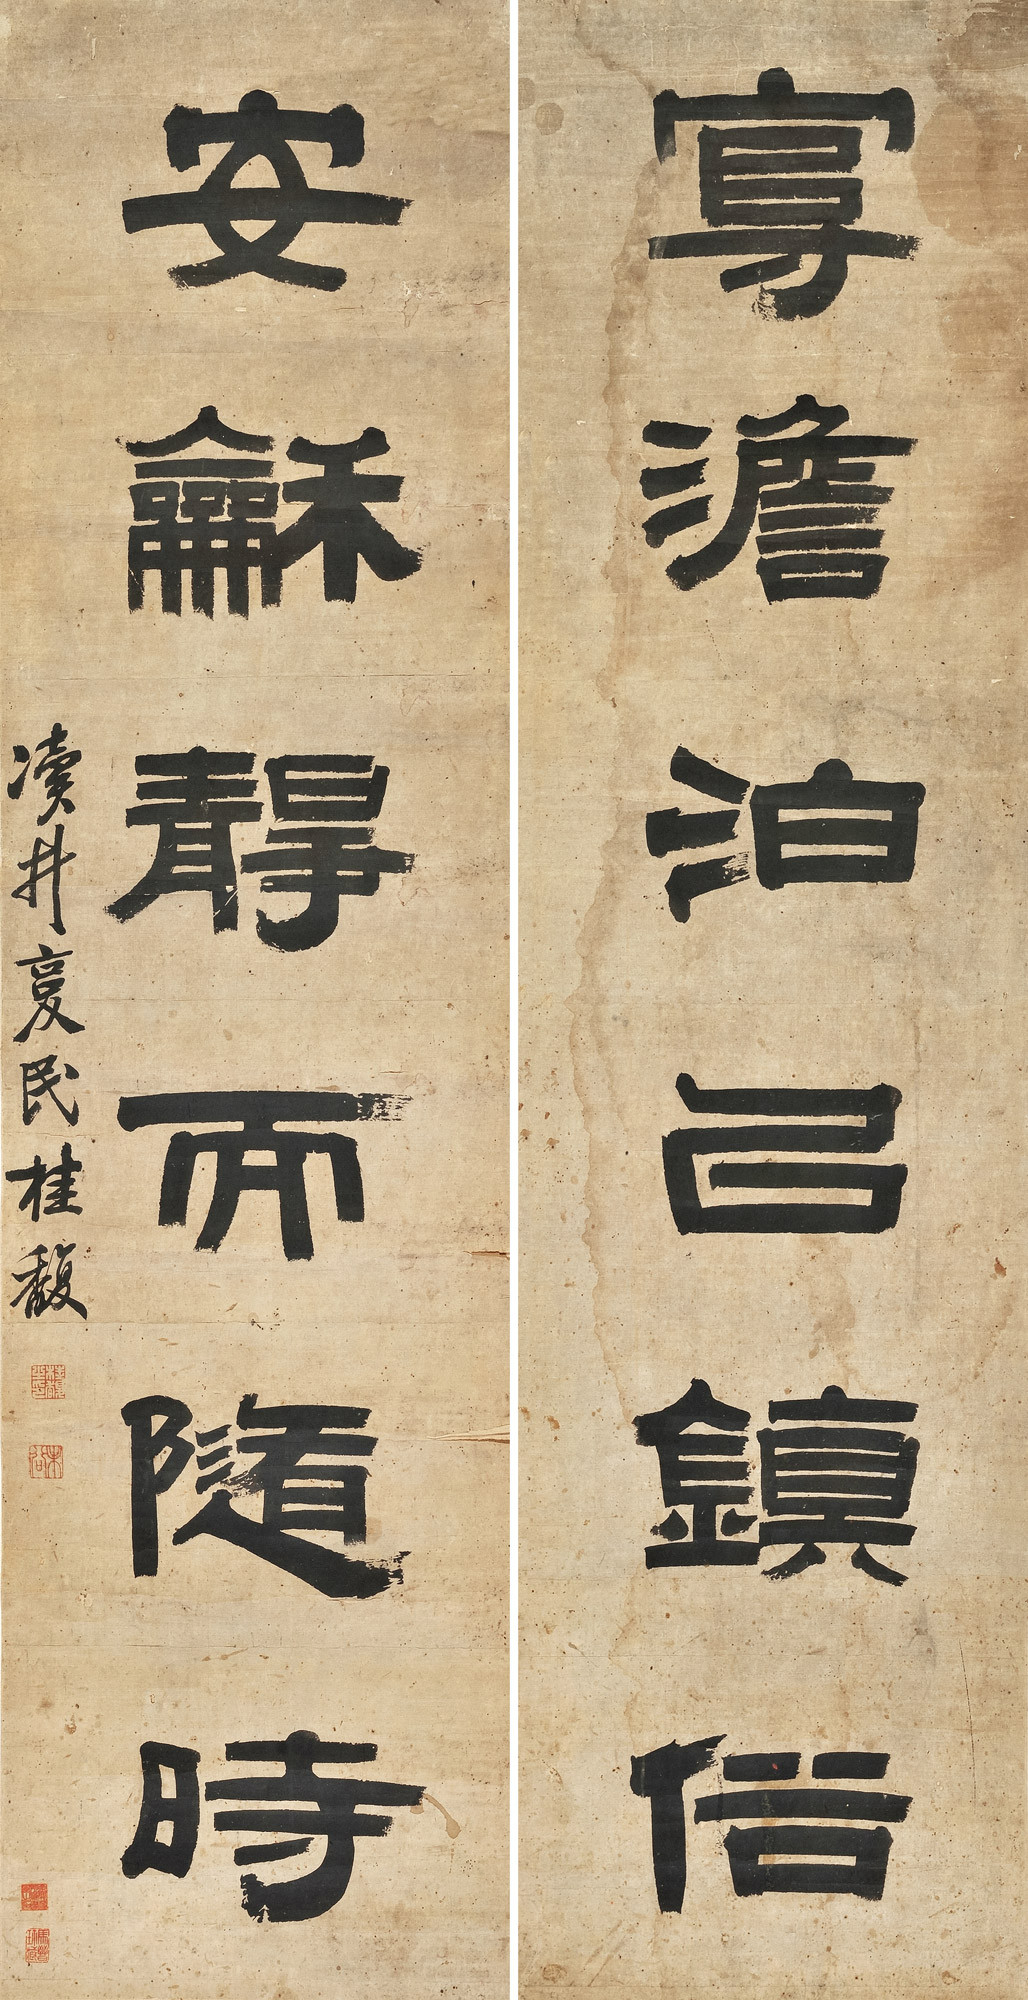 SIX-CHARACTER CALLIGRAPHY COUPLET IN OFFICIAL SCRIPT